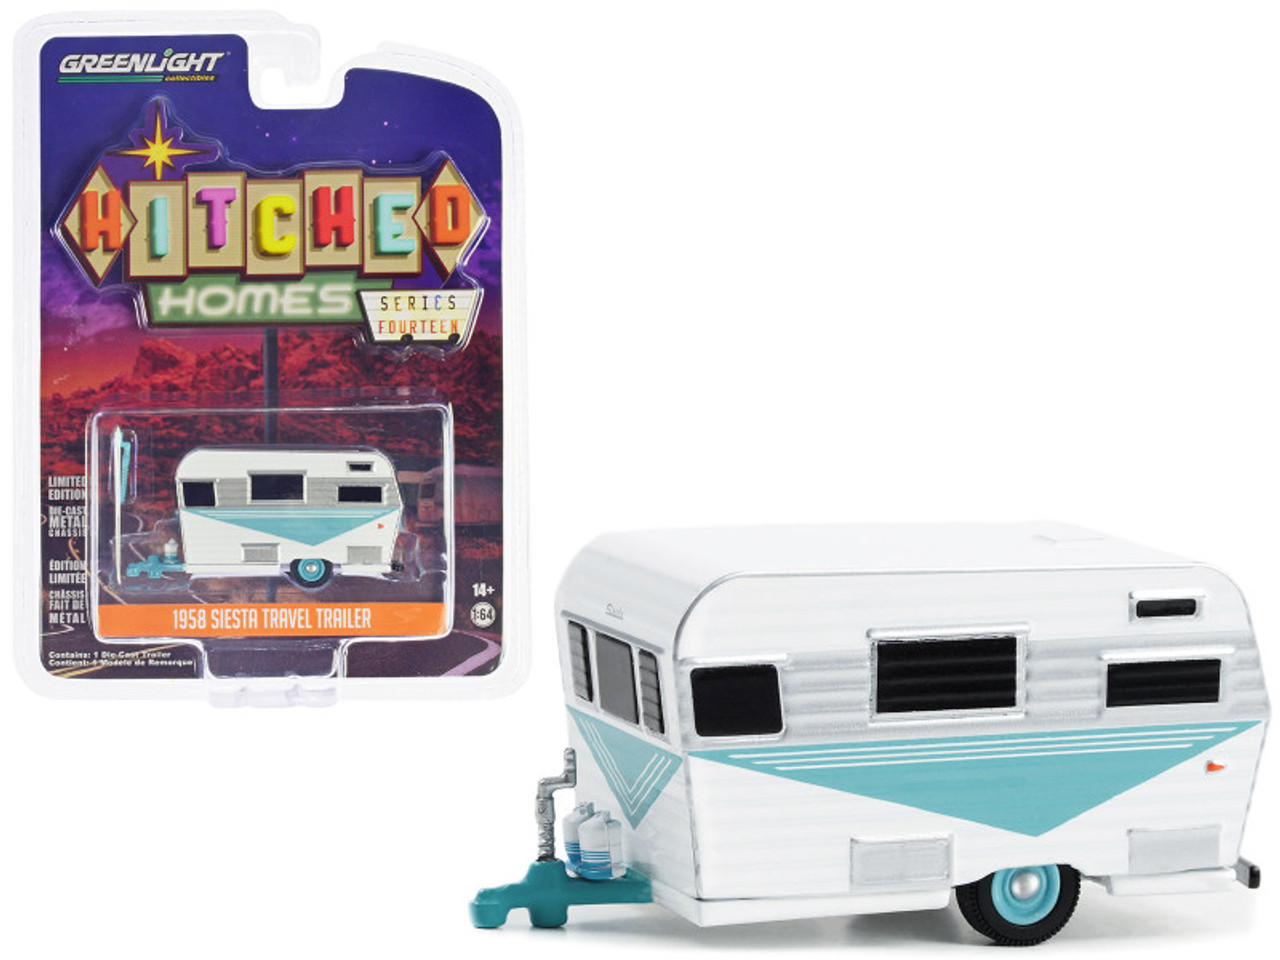 1958 Siesta Travel Trailer White and Teal with Polished Silver Stripes "Hitched Homes" Series 14 1/64 Diecast Model by Greenlight